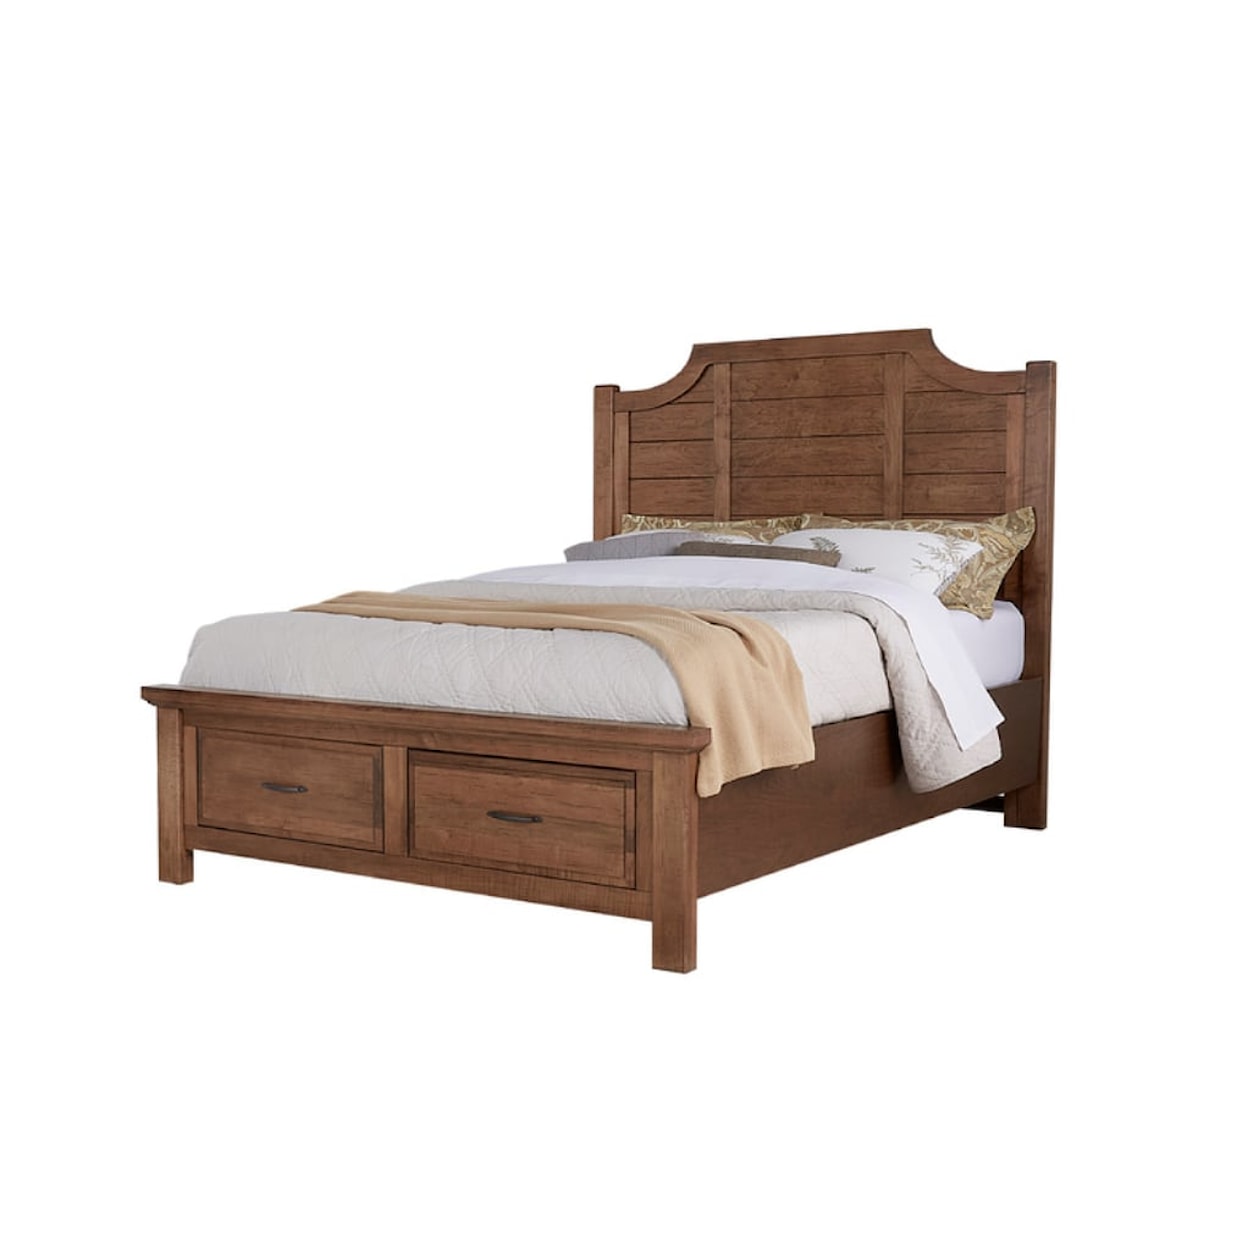 Virginia House Maple Road Queen Scalloped Storage Bed